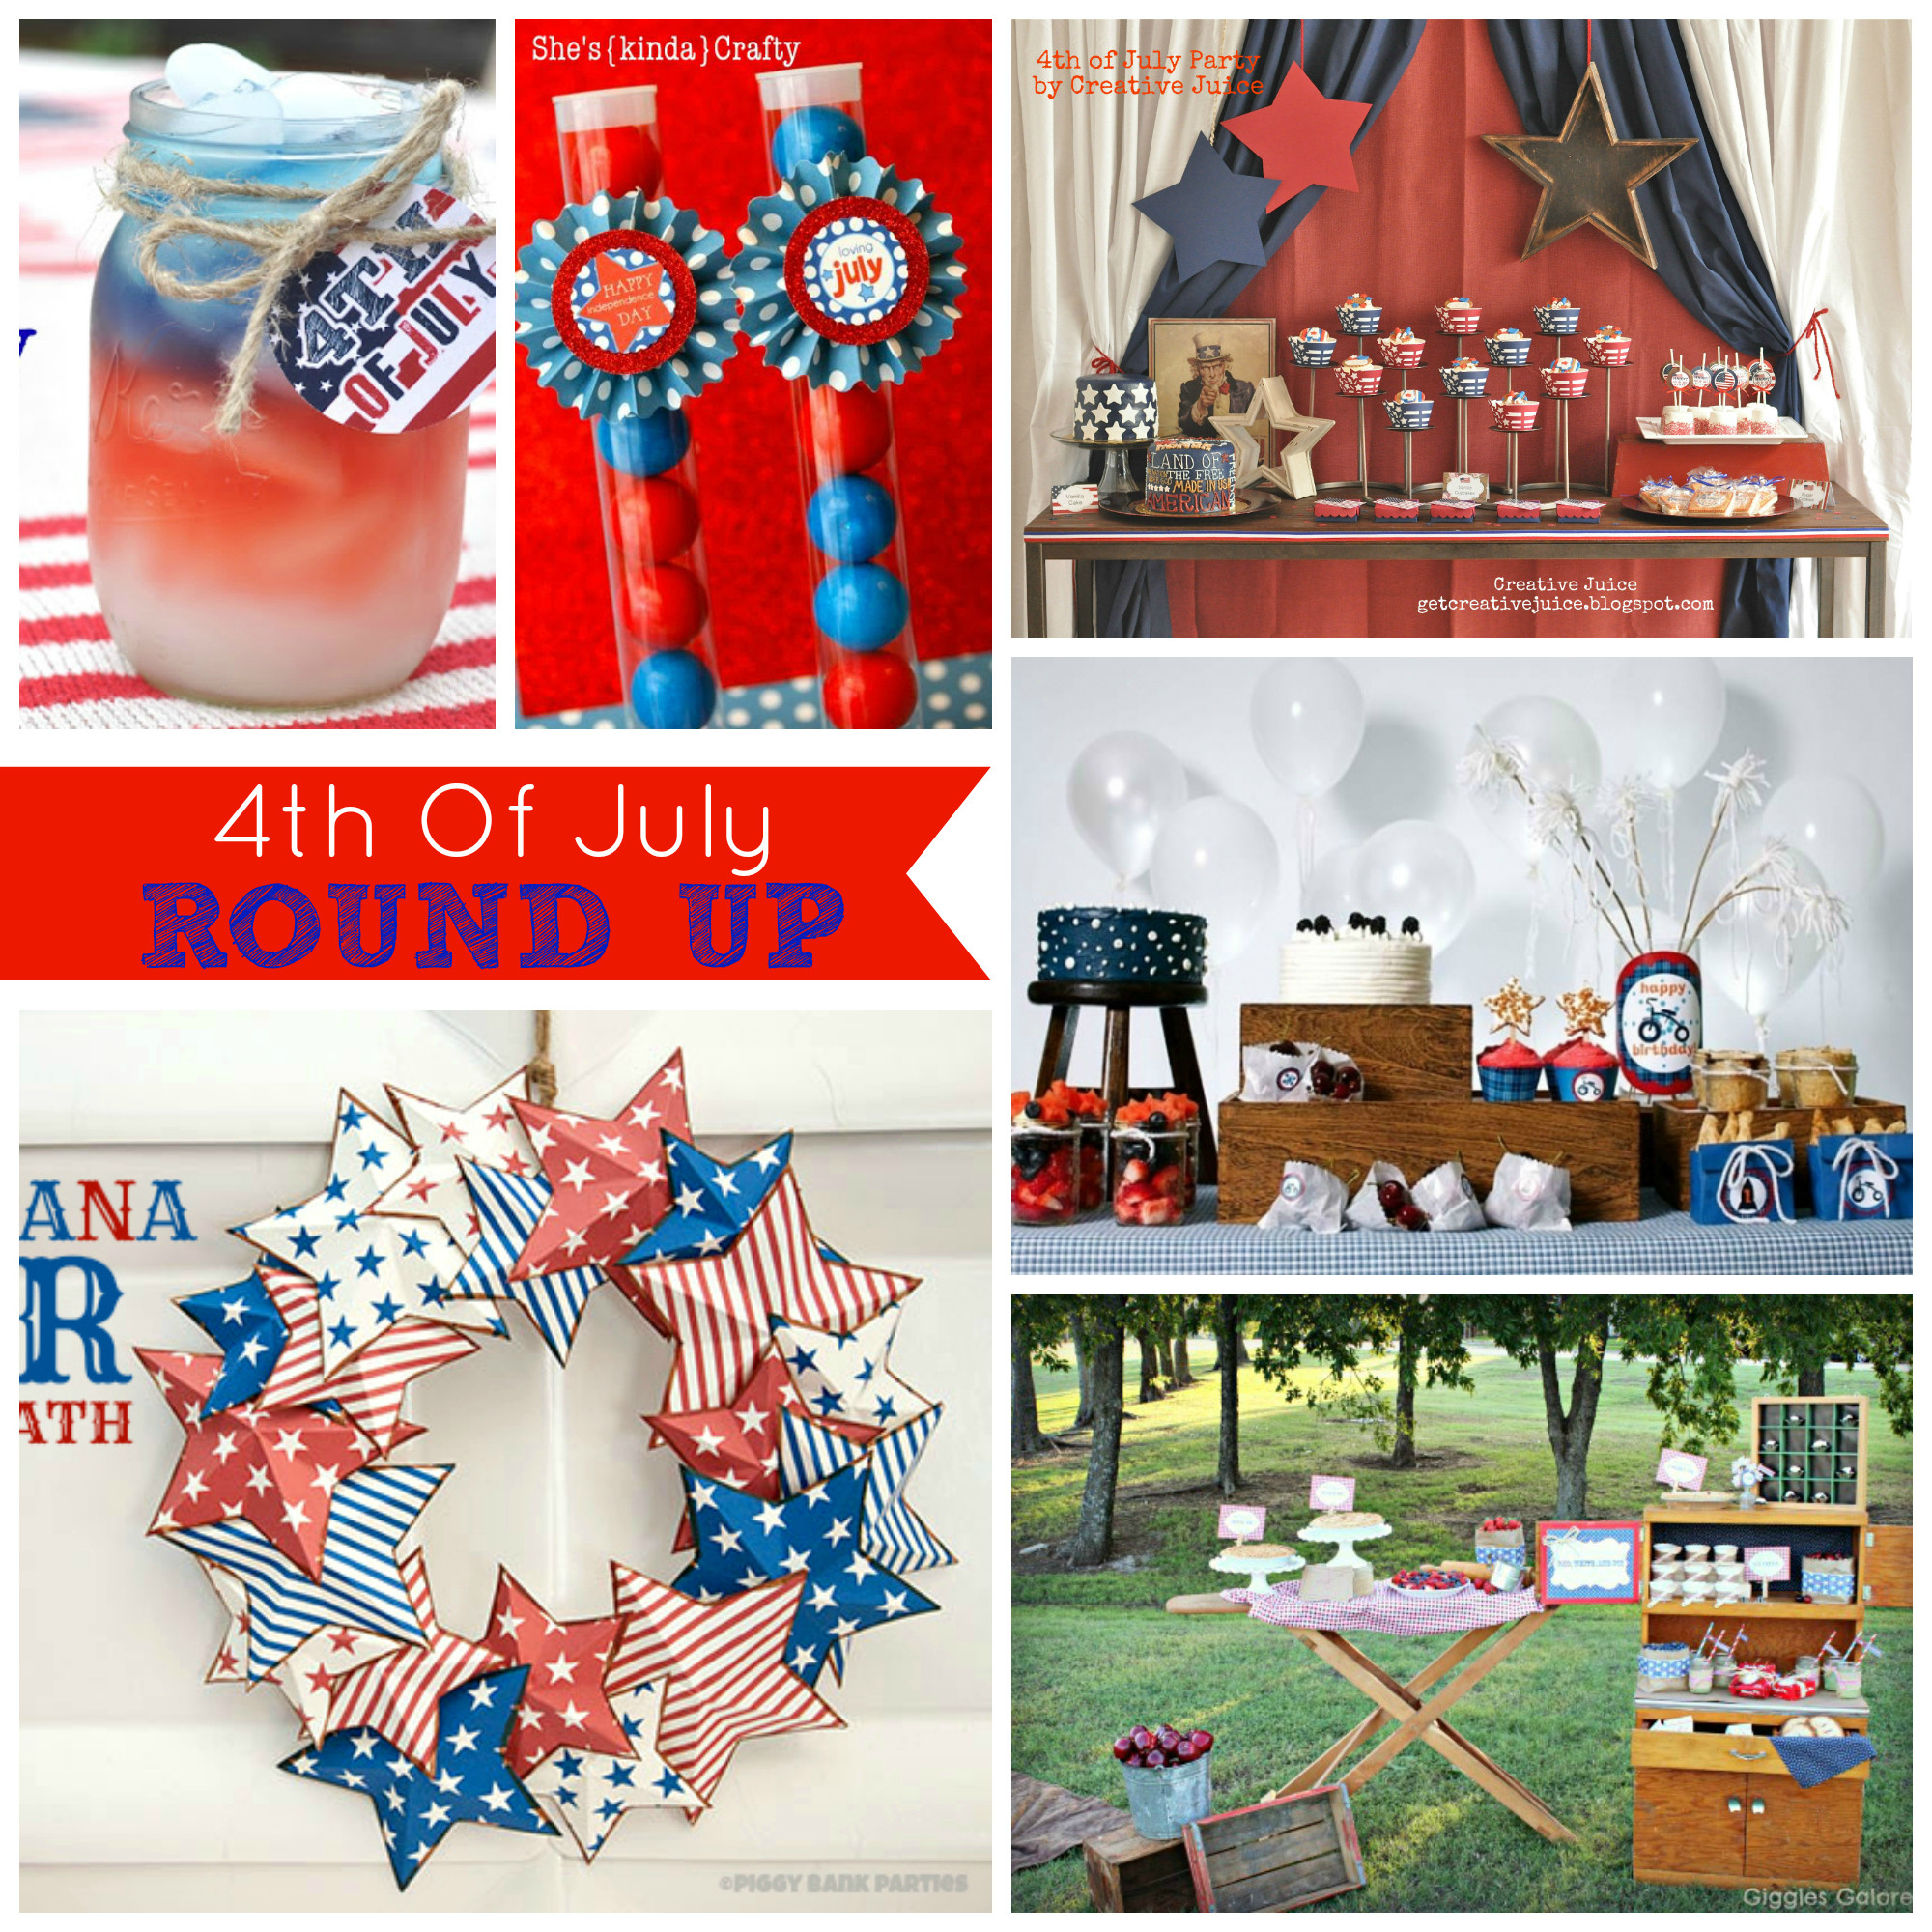 4th Of July Celebration Ideas
 Cupcake Wishes & Birthday Dreams Weekly Round Up 15